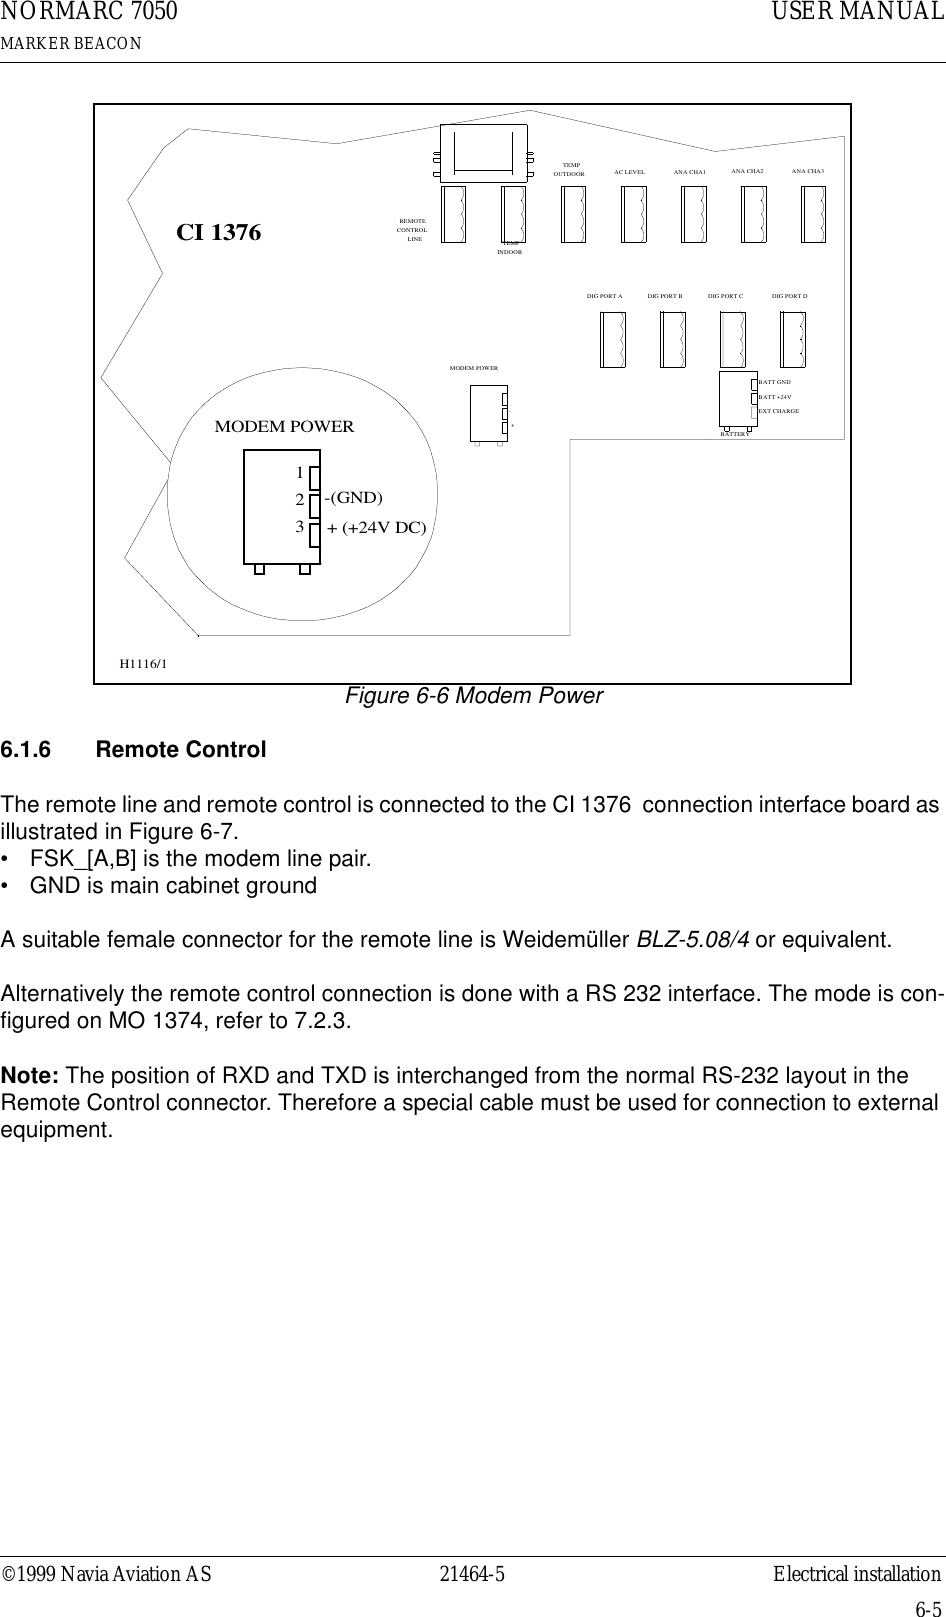 ©1999 Navia Aviation AS 21464-5 Electrical installationUSER MANUALNORMARC 7050MARKER BEACON6-5Figure 6-6 Modem Power6.1.6  Remote ControlThe remote line and remote control is connected to the CI 1376  connection interface board as illustrated in Figure 6-7. • FSK_[A,B] is the modem line pair.• GND is main cabinet groundA suitable female connector for the remote line is Weidemüller BLZ-5.08/4 or equivalent.Alternatively the remote control connection is done with a RS 232 interface. The mode is con-figured on MO 1374, refer to 7.2.3.Note: The position of RXD and TXD is interchanged from the normal RS-232 layout in the Remote Control connector. Therefore a special cable must be used for connection to external equipment.CI 1376REMOTECONTROLLINETEMPOUTDOORTEMPINDOORAC LEVEL ANA CHA1 ANA CHA2 ANA CHA3DIG PORT A DIG PORT B DIG PORT C DIG PORT D-(GND)123BATT GNDEXT CHARGEBATT +24VBATTERY- ++ (+24V DC)MODEM POWERMODEM POWERH1116/1